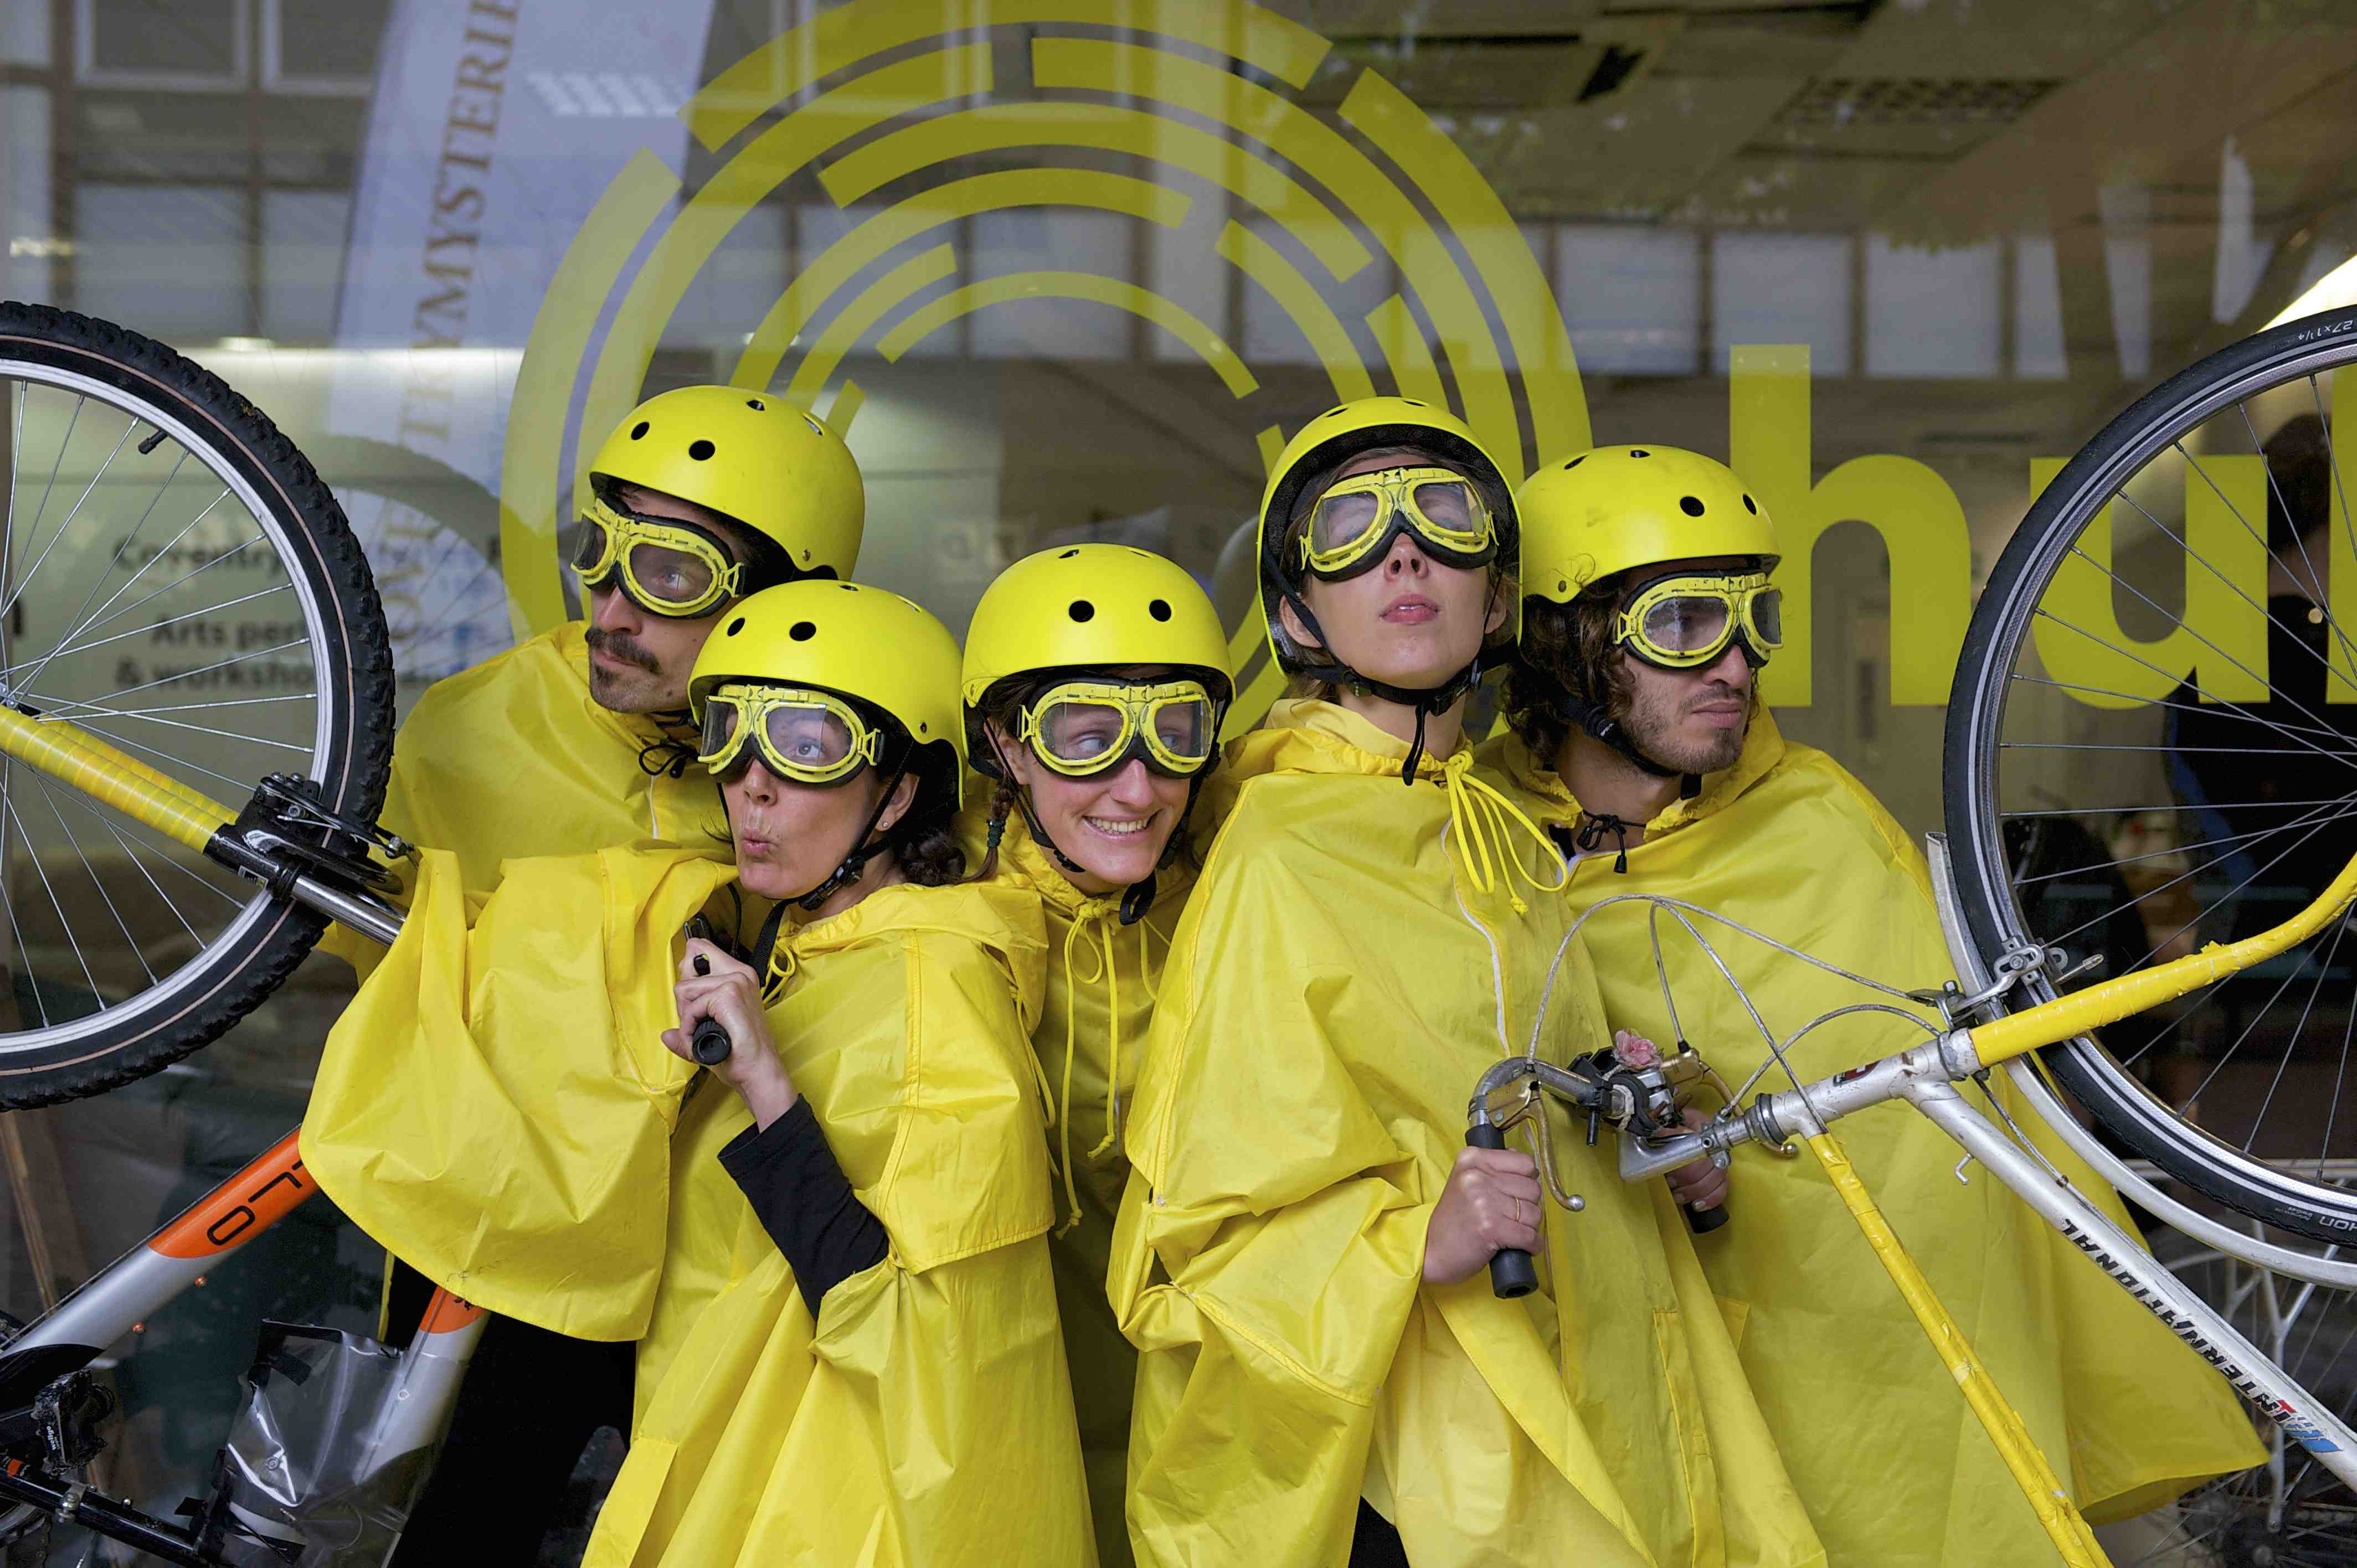 5 performers dressed in yellow cycling rain capes, yellow helmets and yellow goggles, strike a pose with 2 bikes